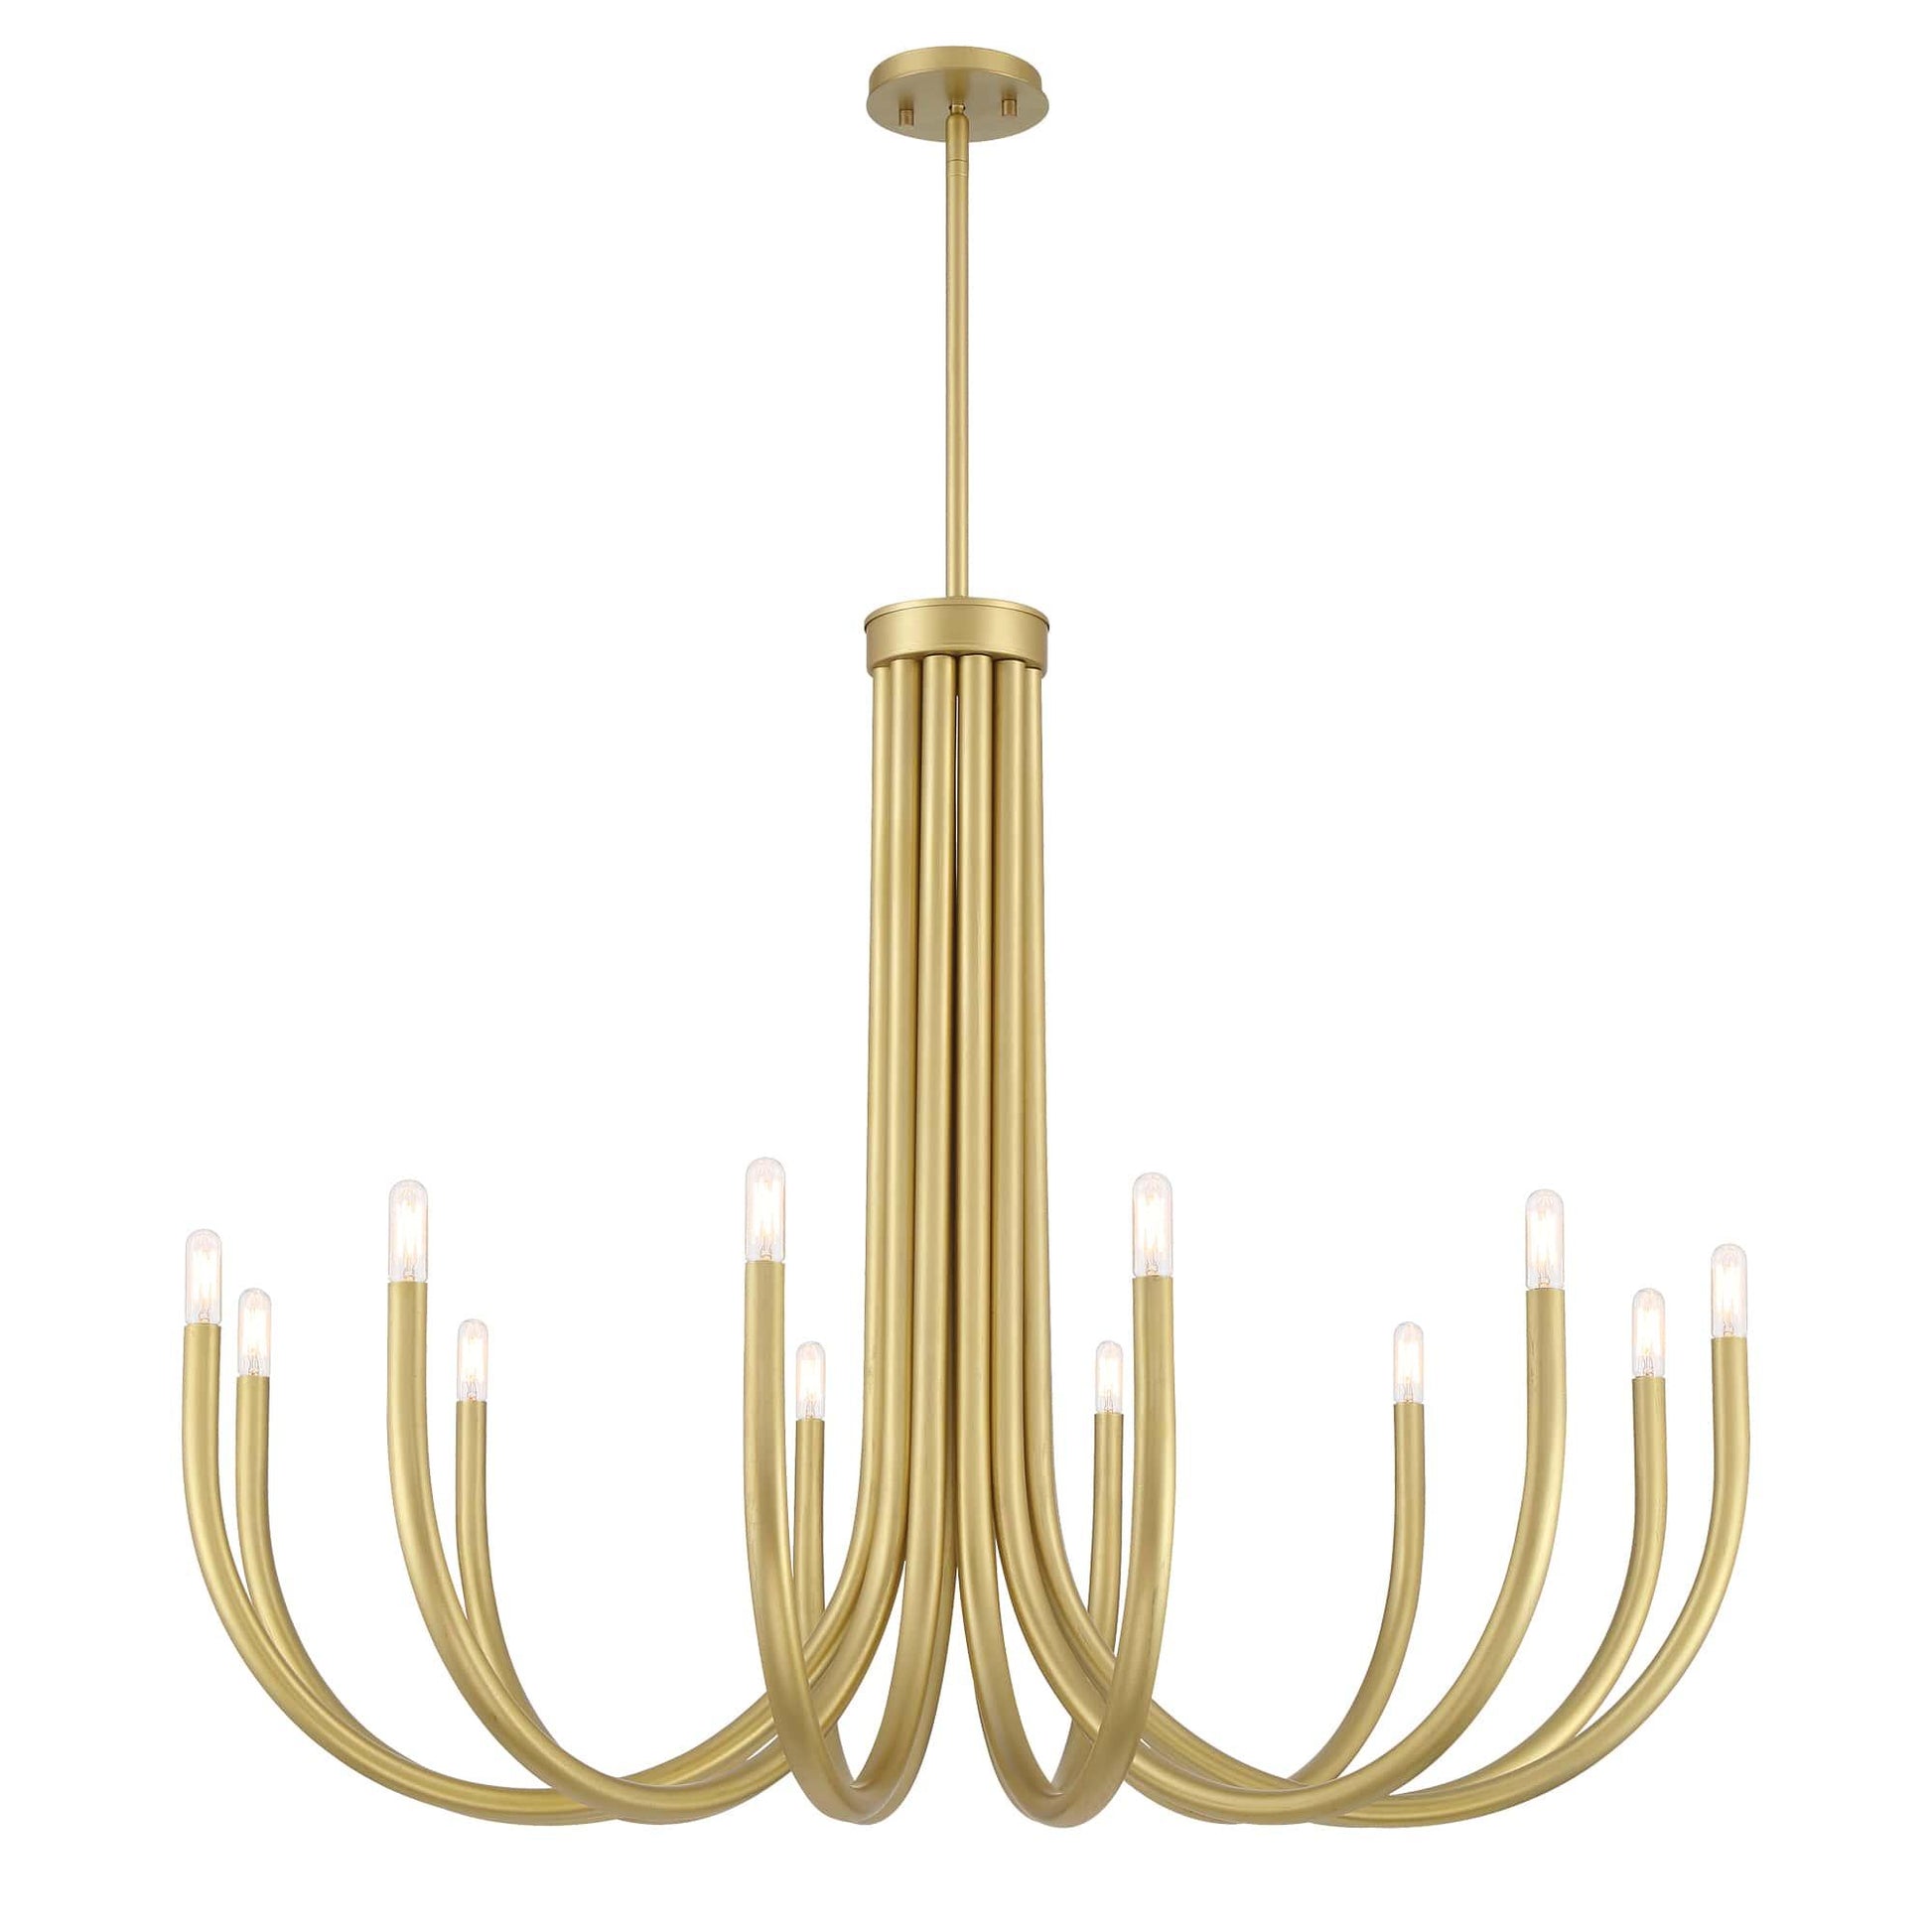 12 light modern industrial chandelier (4) by ACROMA